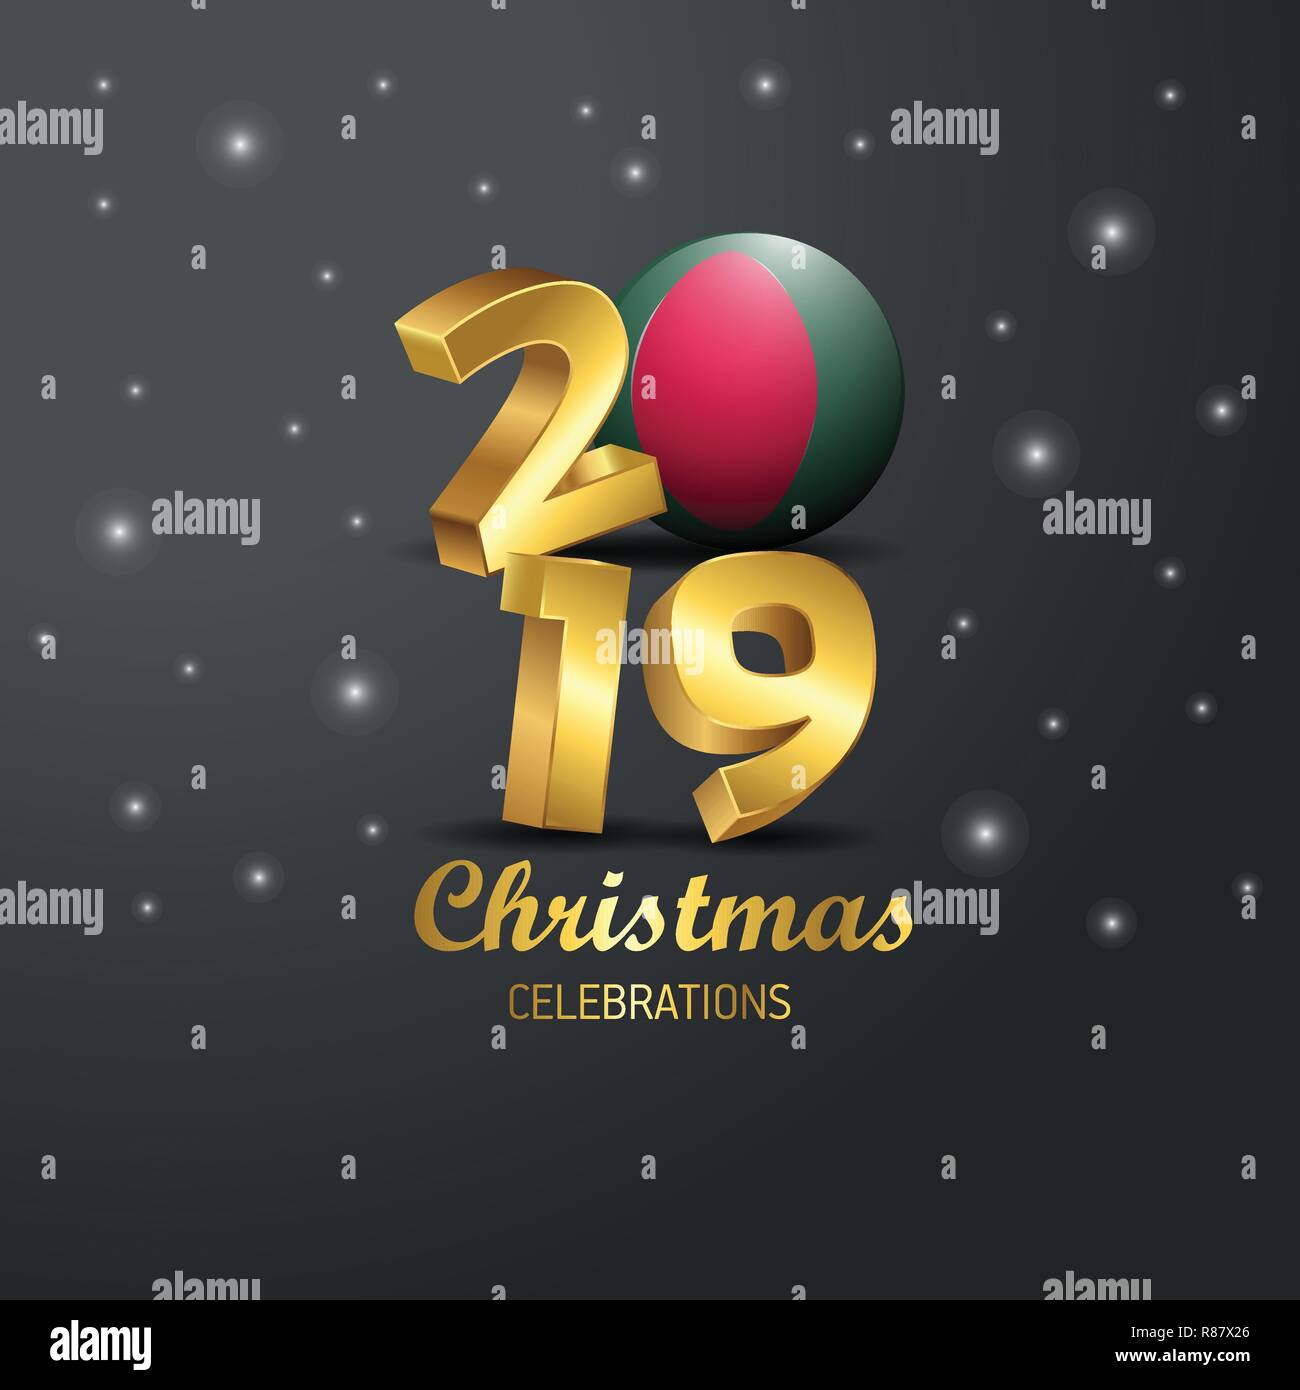 Bangladesh Flag 2019 Merry Christmas Typography. New Year Abstract Celebration background Stock Vector